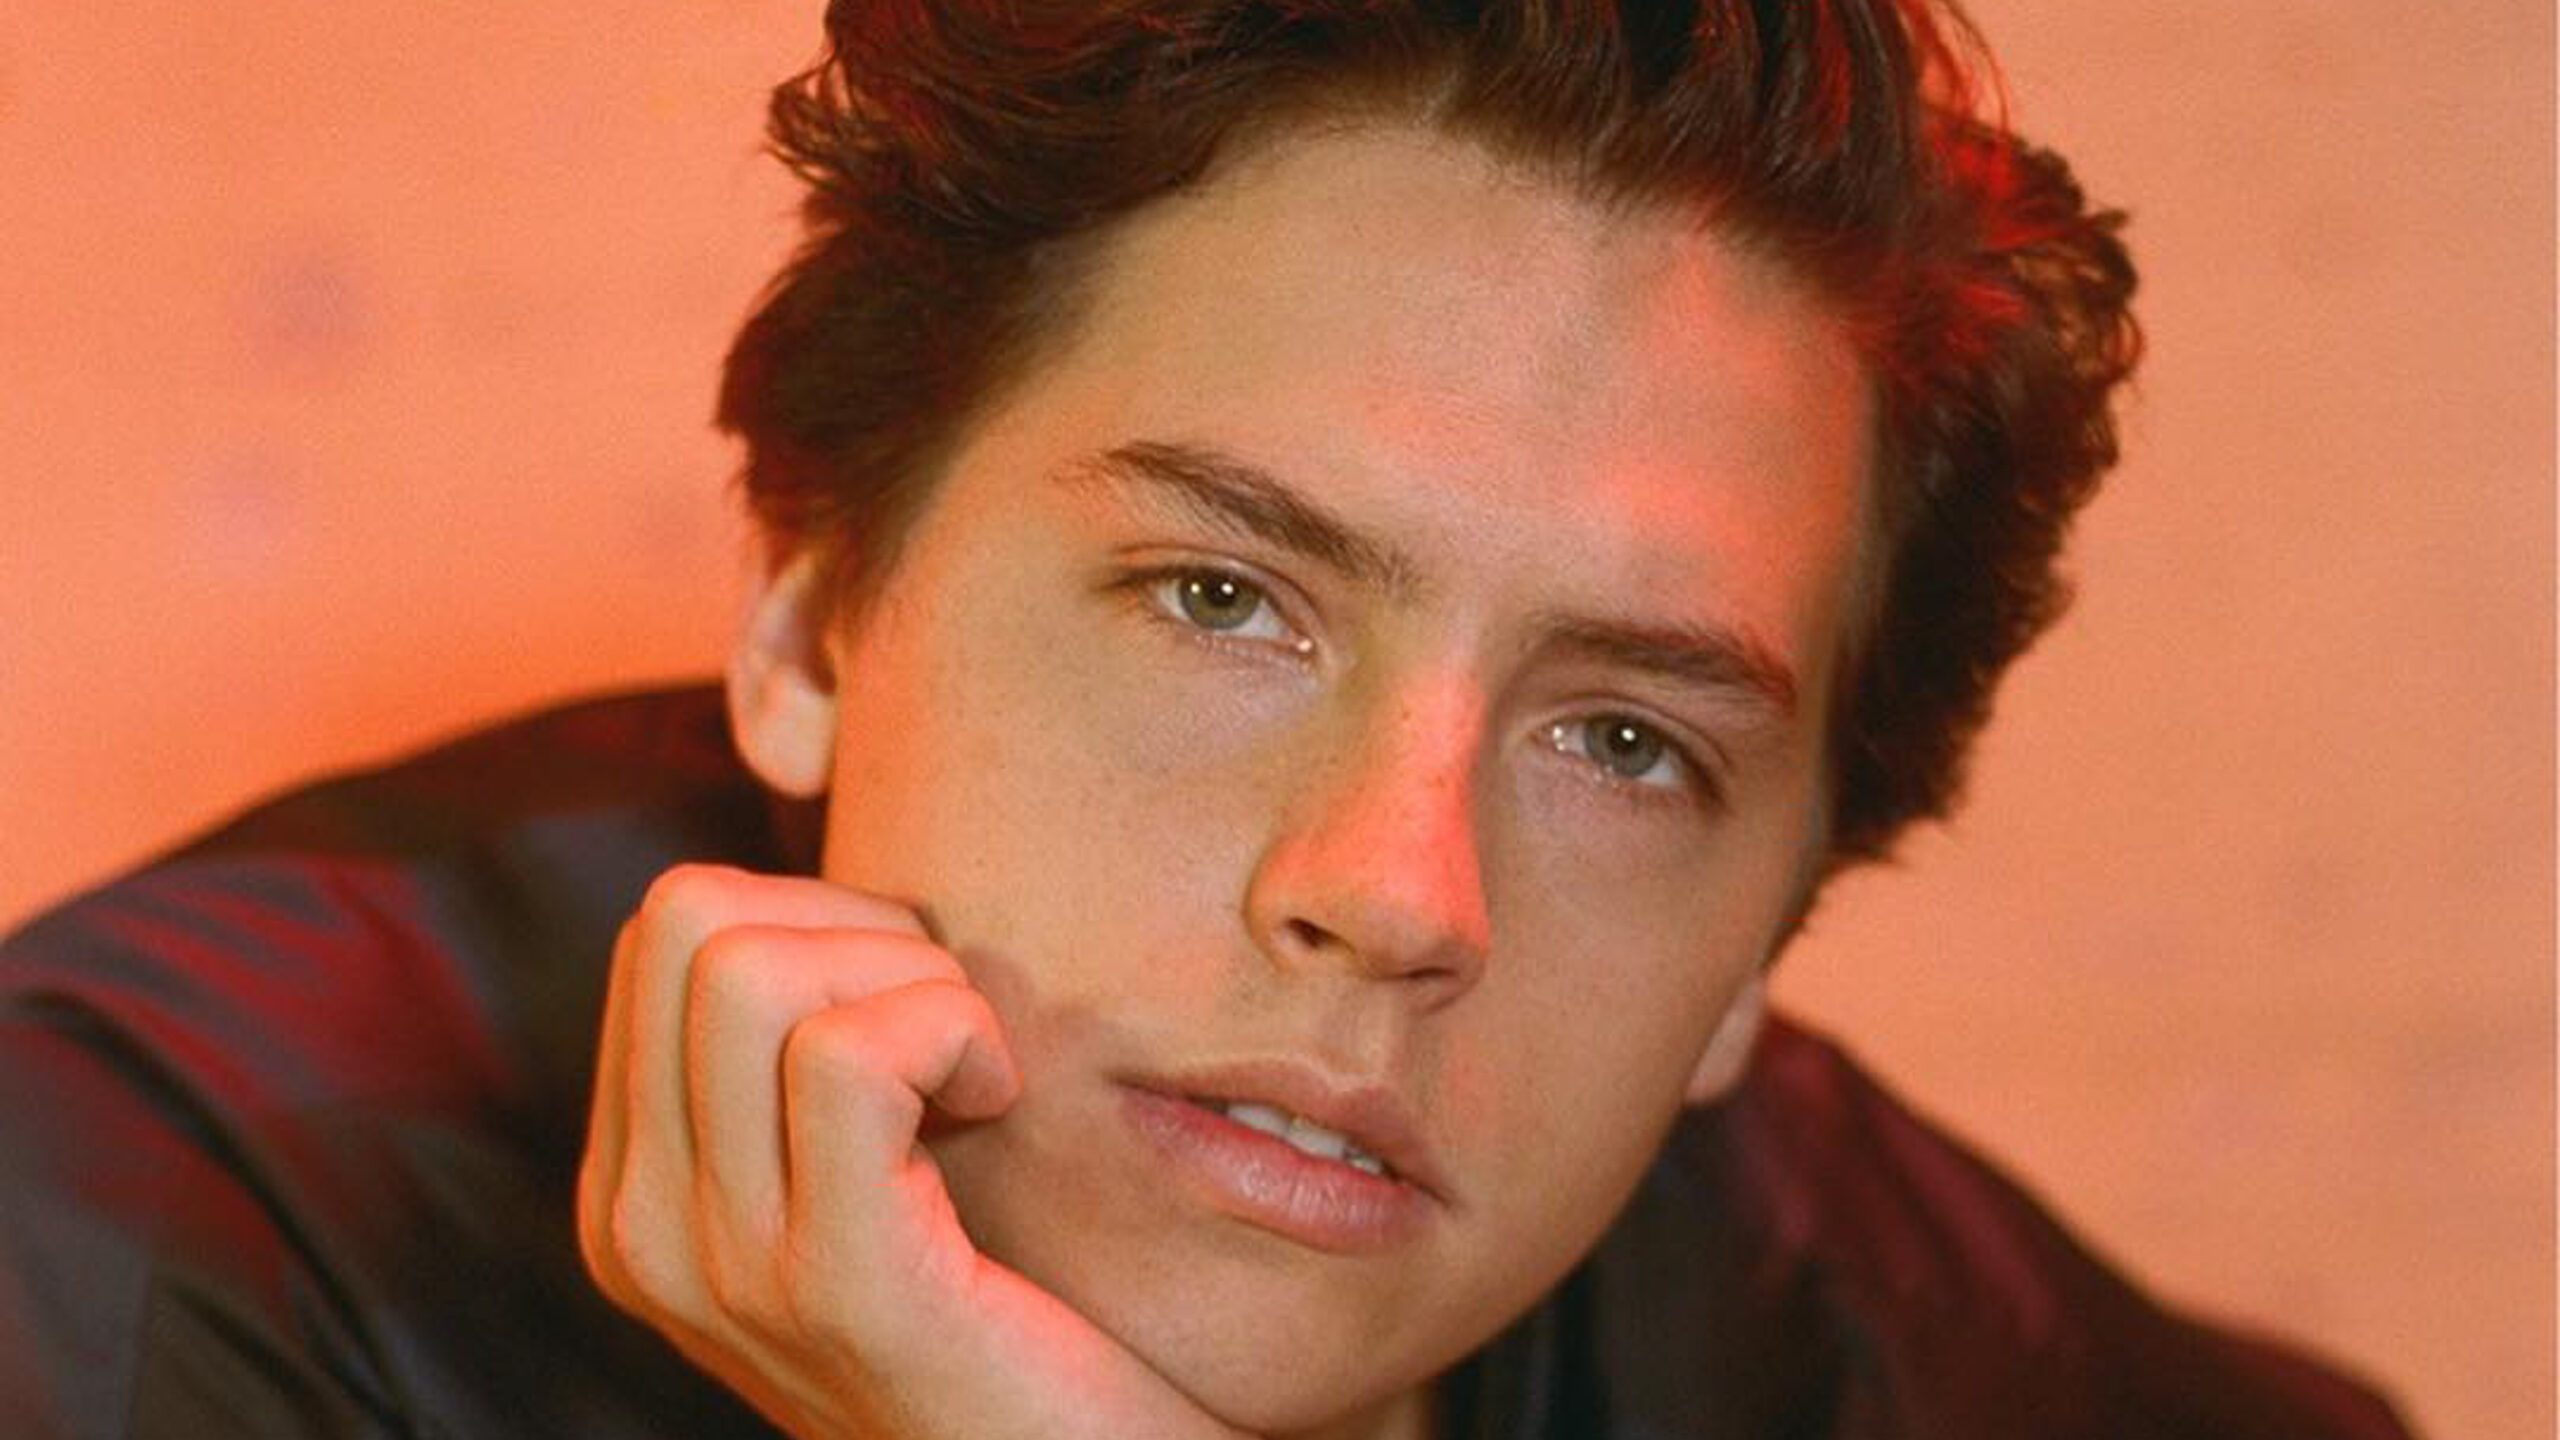 LOOK: Cole Sprouse is the new face of Bench